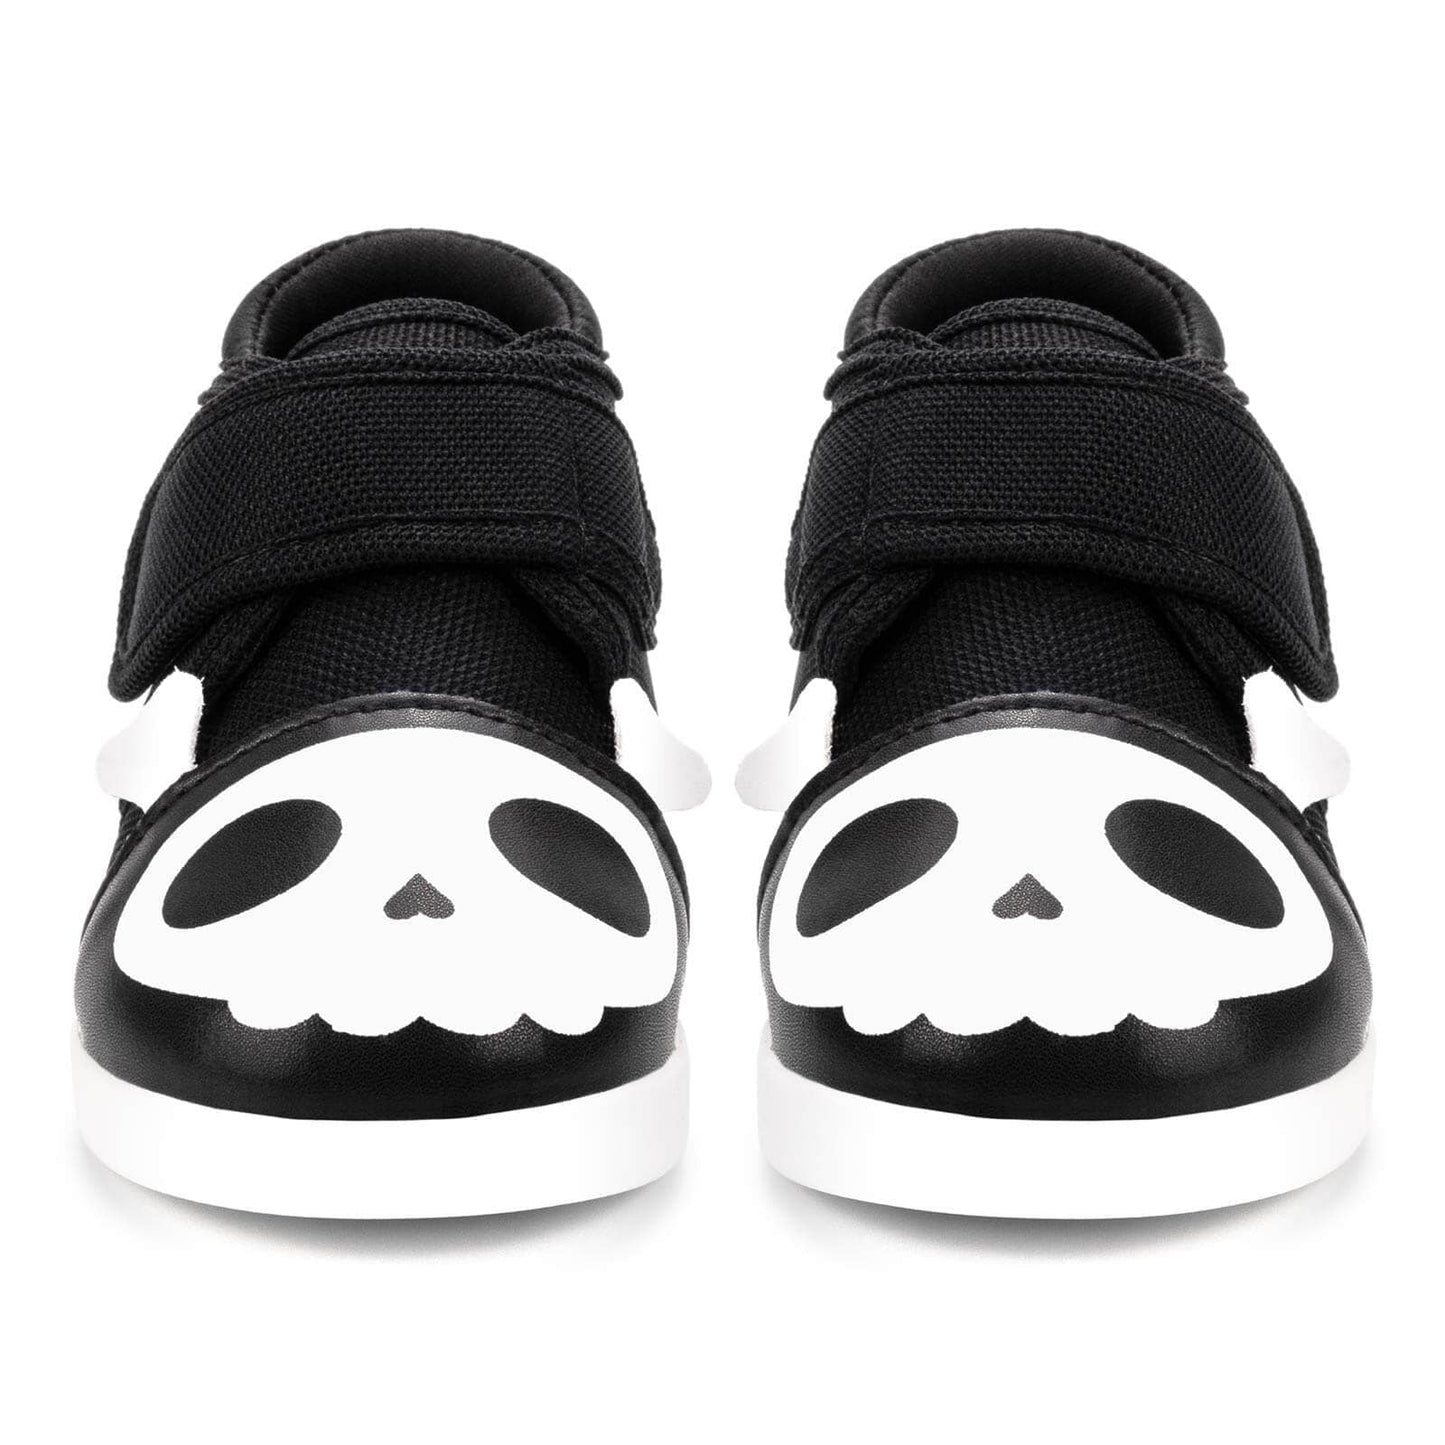 Skull & Crossbones Pirate Toddler Shoes | Black/White Squeaky Shoes ikiki® Shoes 